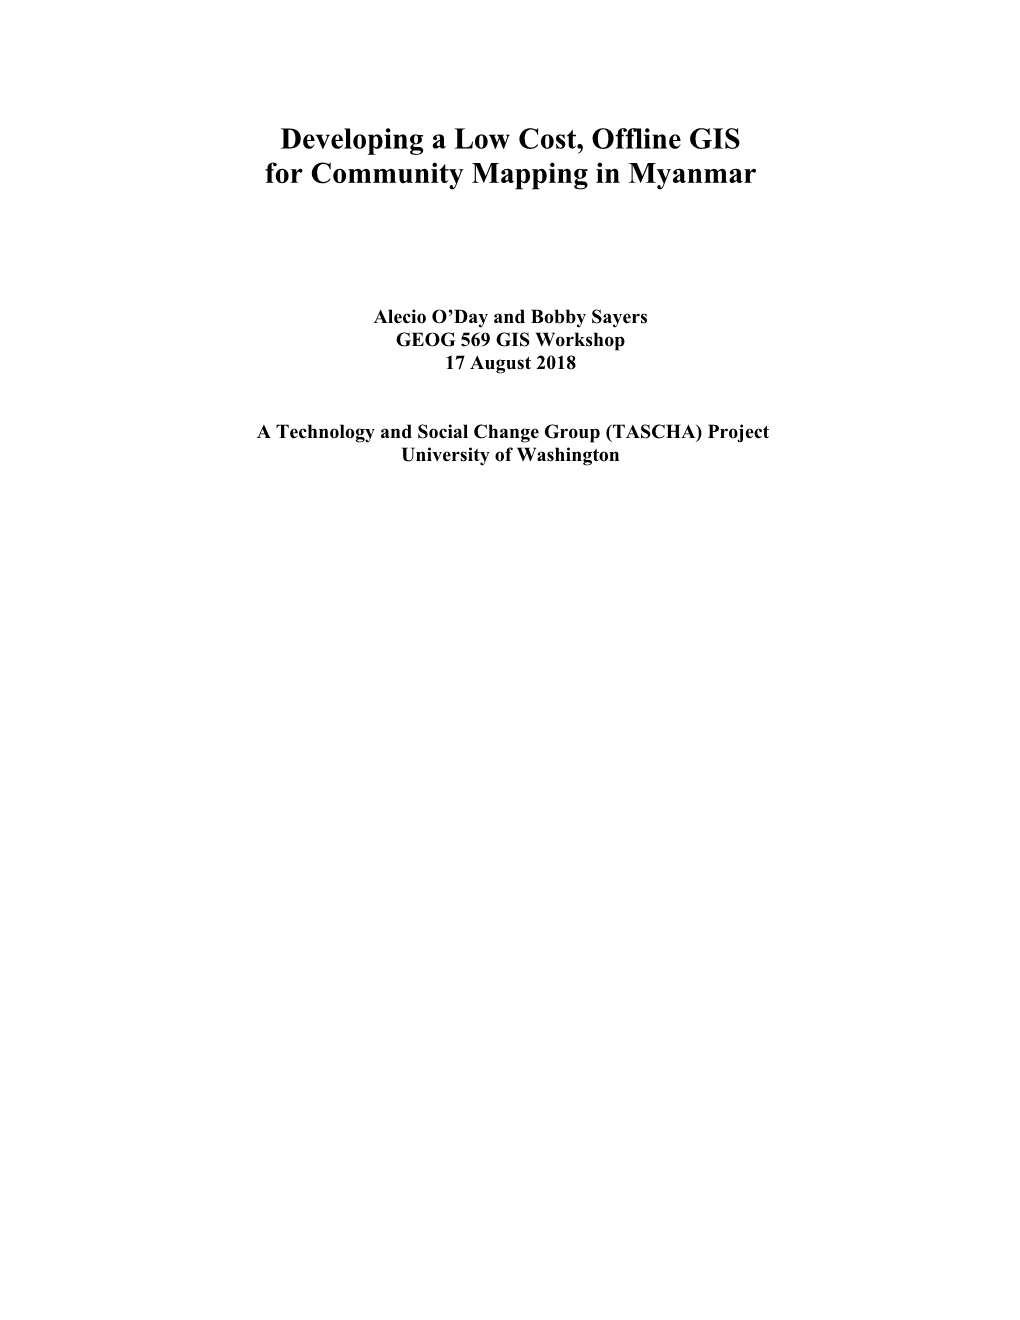 Developing a Low Cost, Offline GIS for Community Mapping in Myanmar